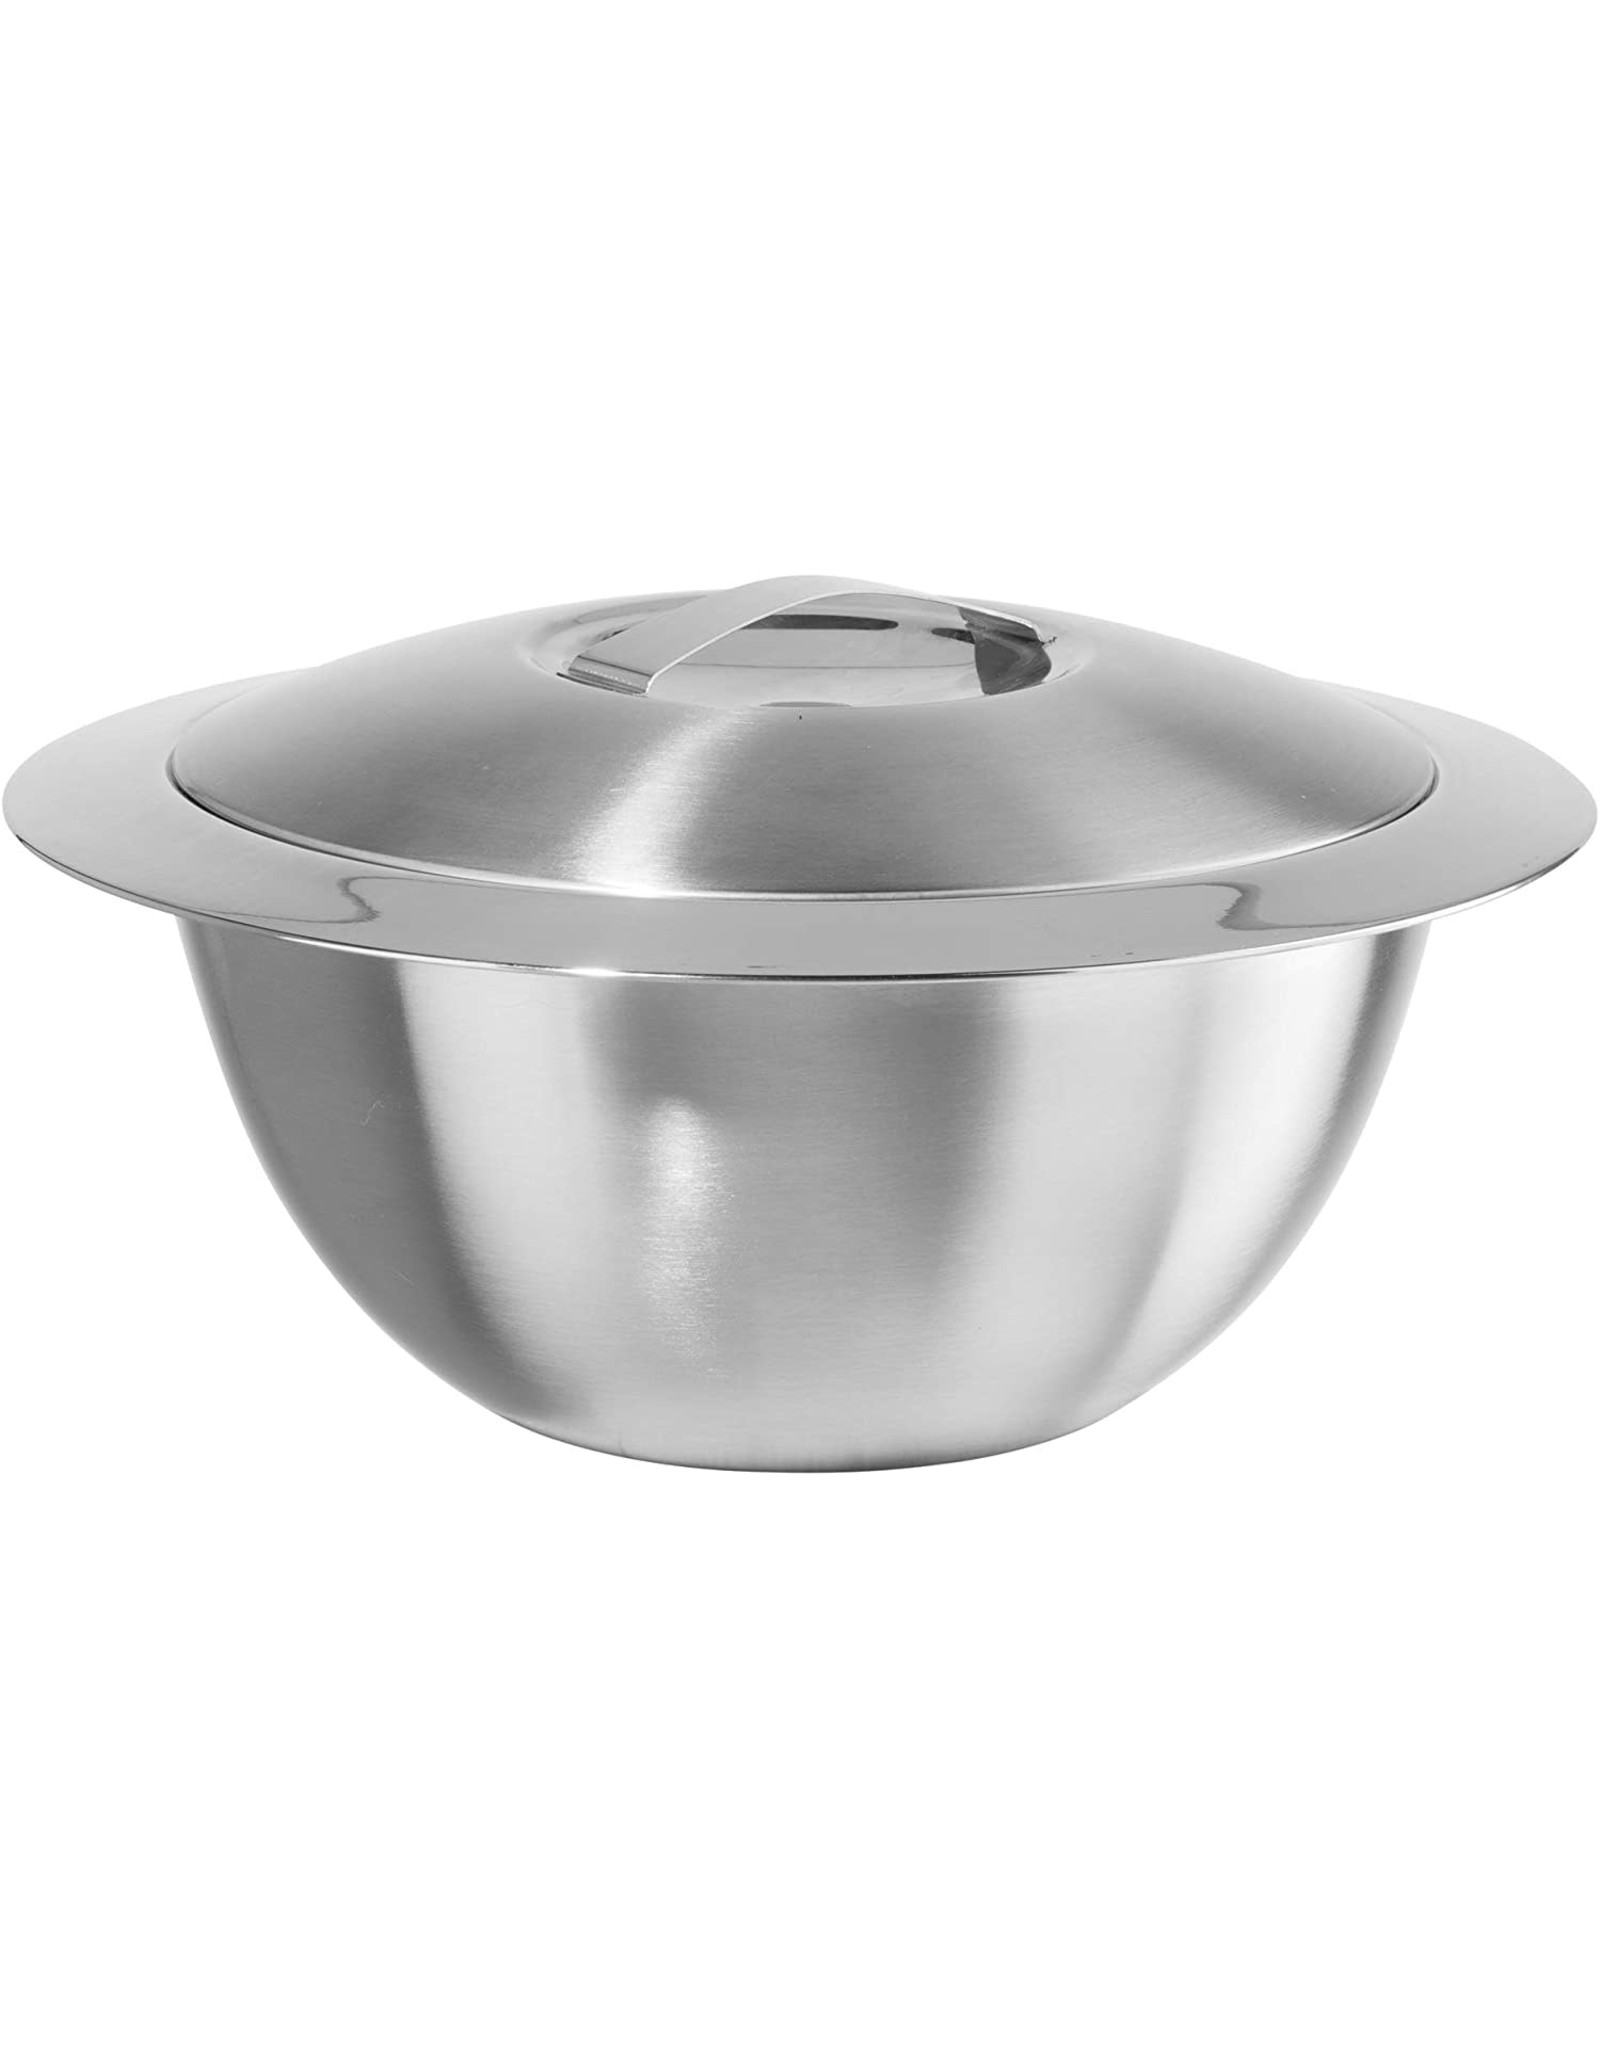 https://cdn.shoplightspeed.com/shops/635781/files/26538342/1600x2048x2/double-wall-insulated-hot-cold-serving-bowl-with-l.jpg